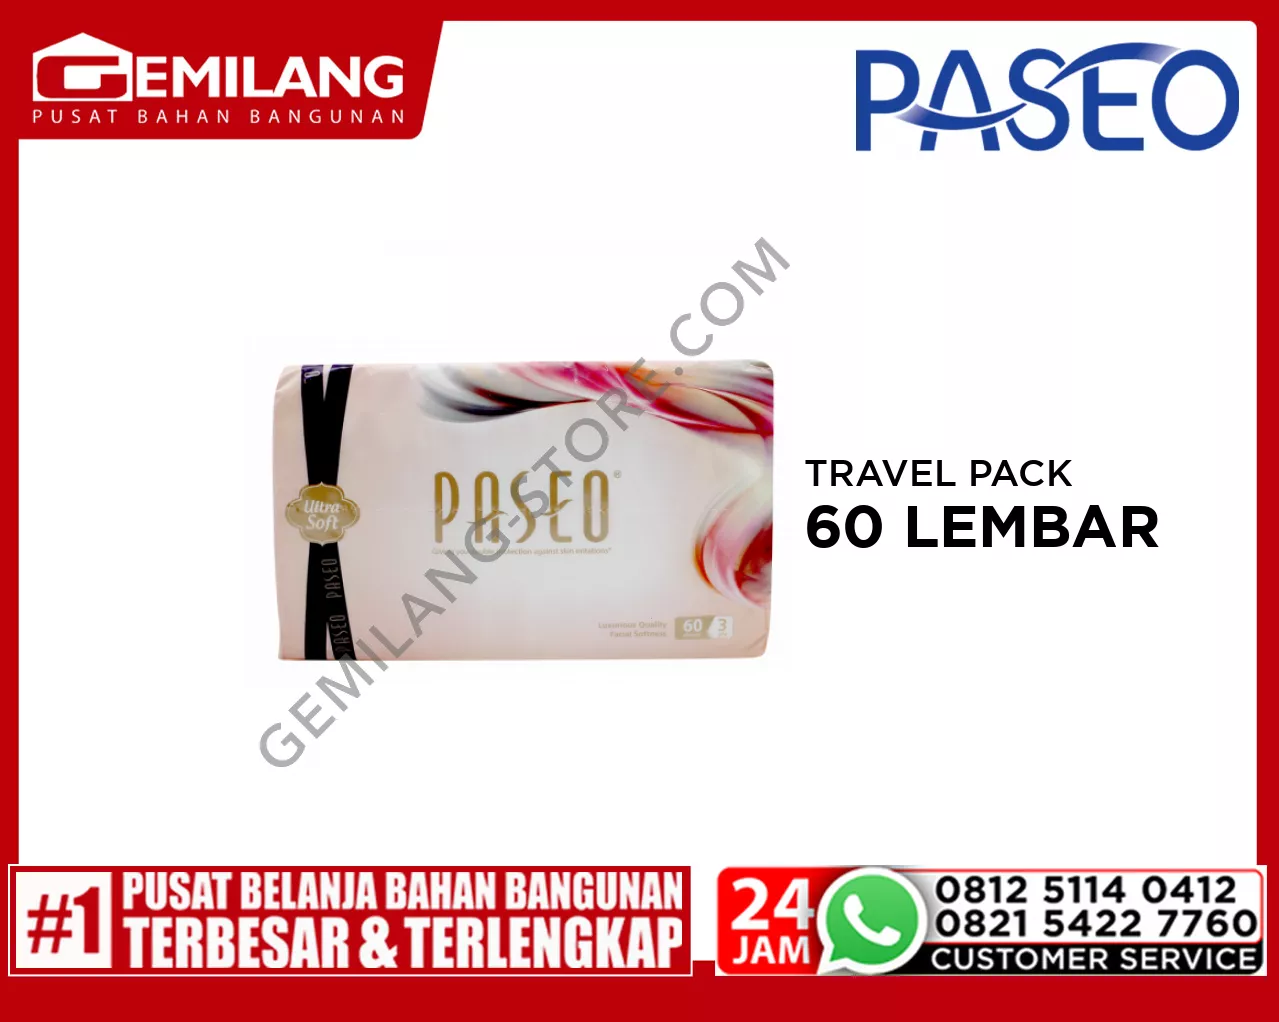 PASEO TRAVEL PACK ULTRA 60